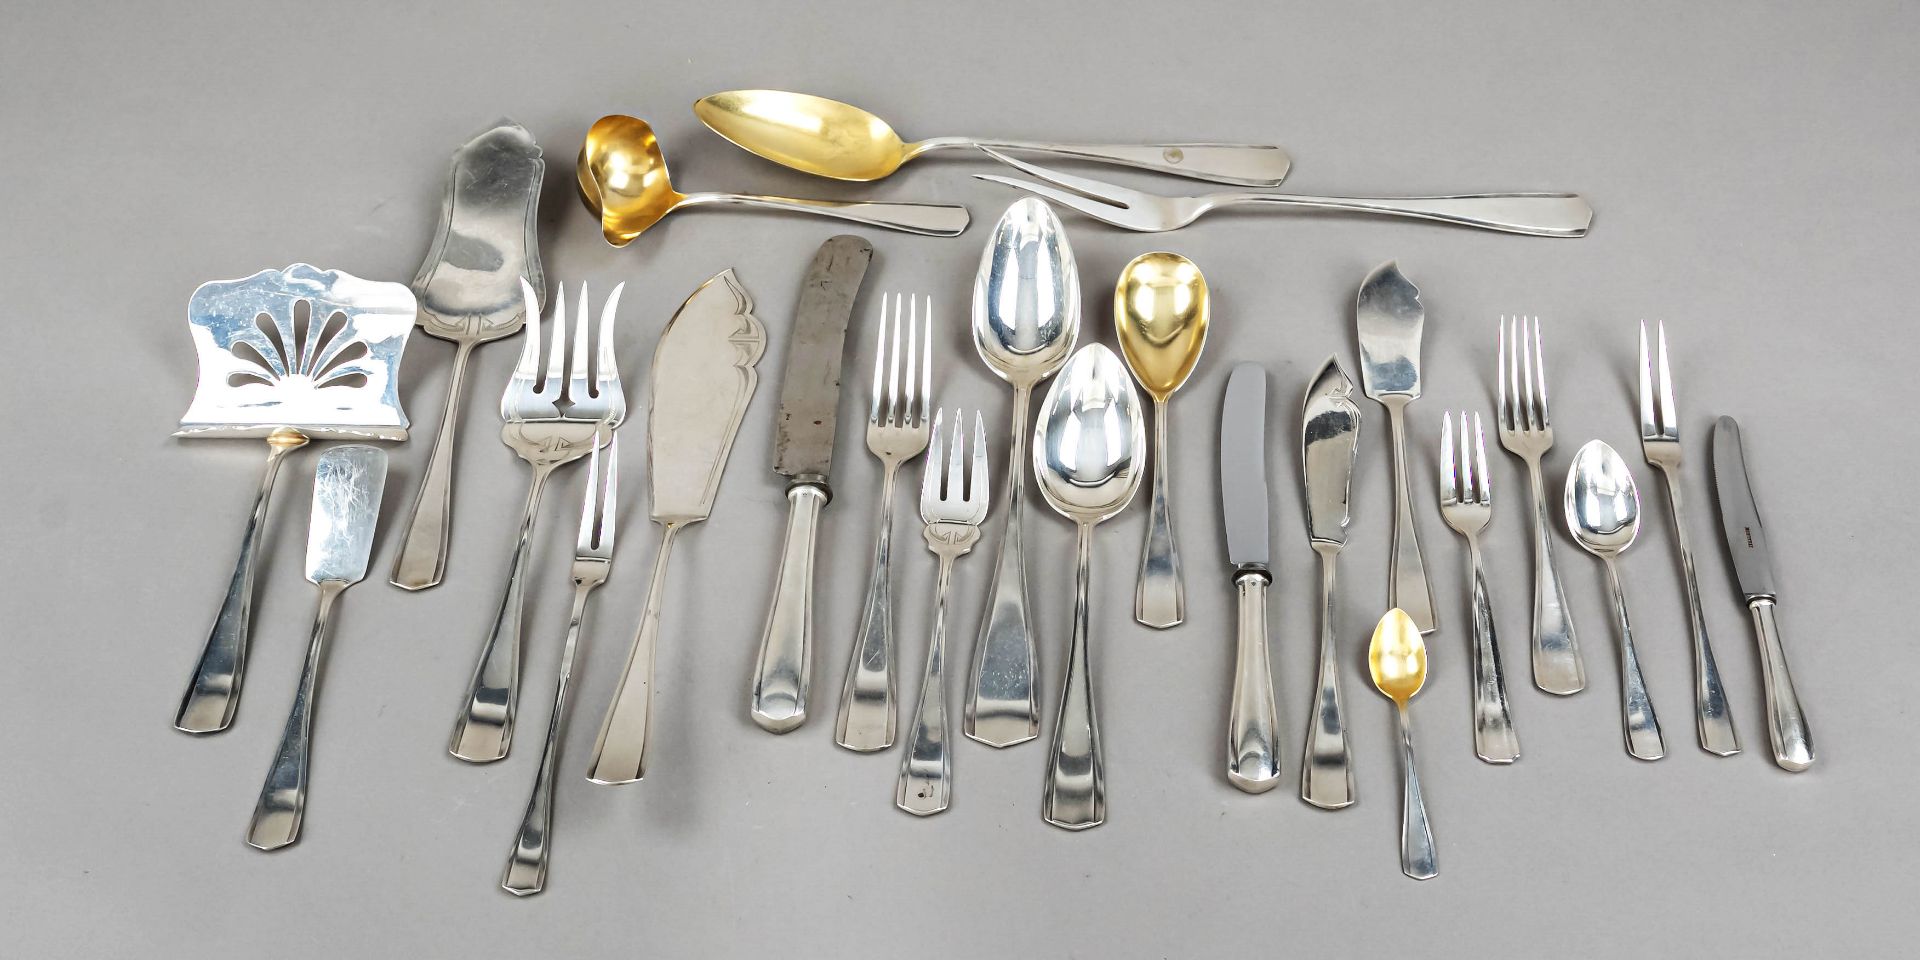 Cutlery for twelve persons, German, 20th c., MZ, jeweler's mark P. Krauspe, silver 800/000, smooth